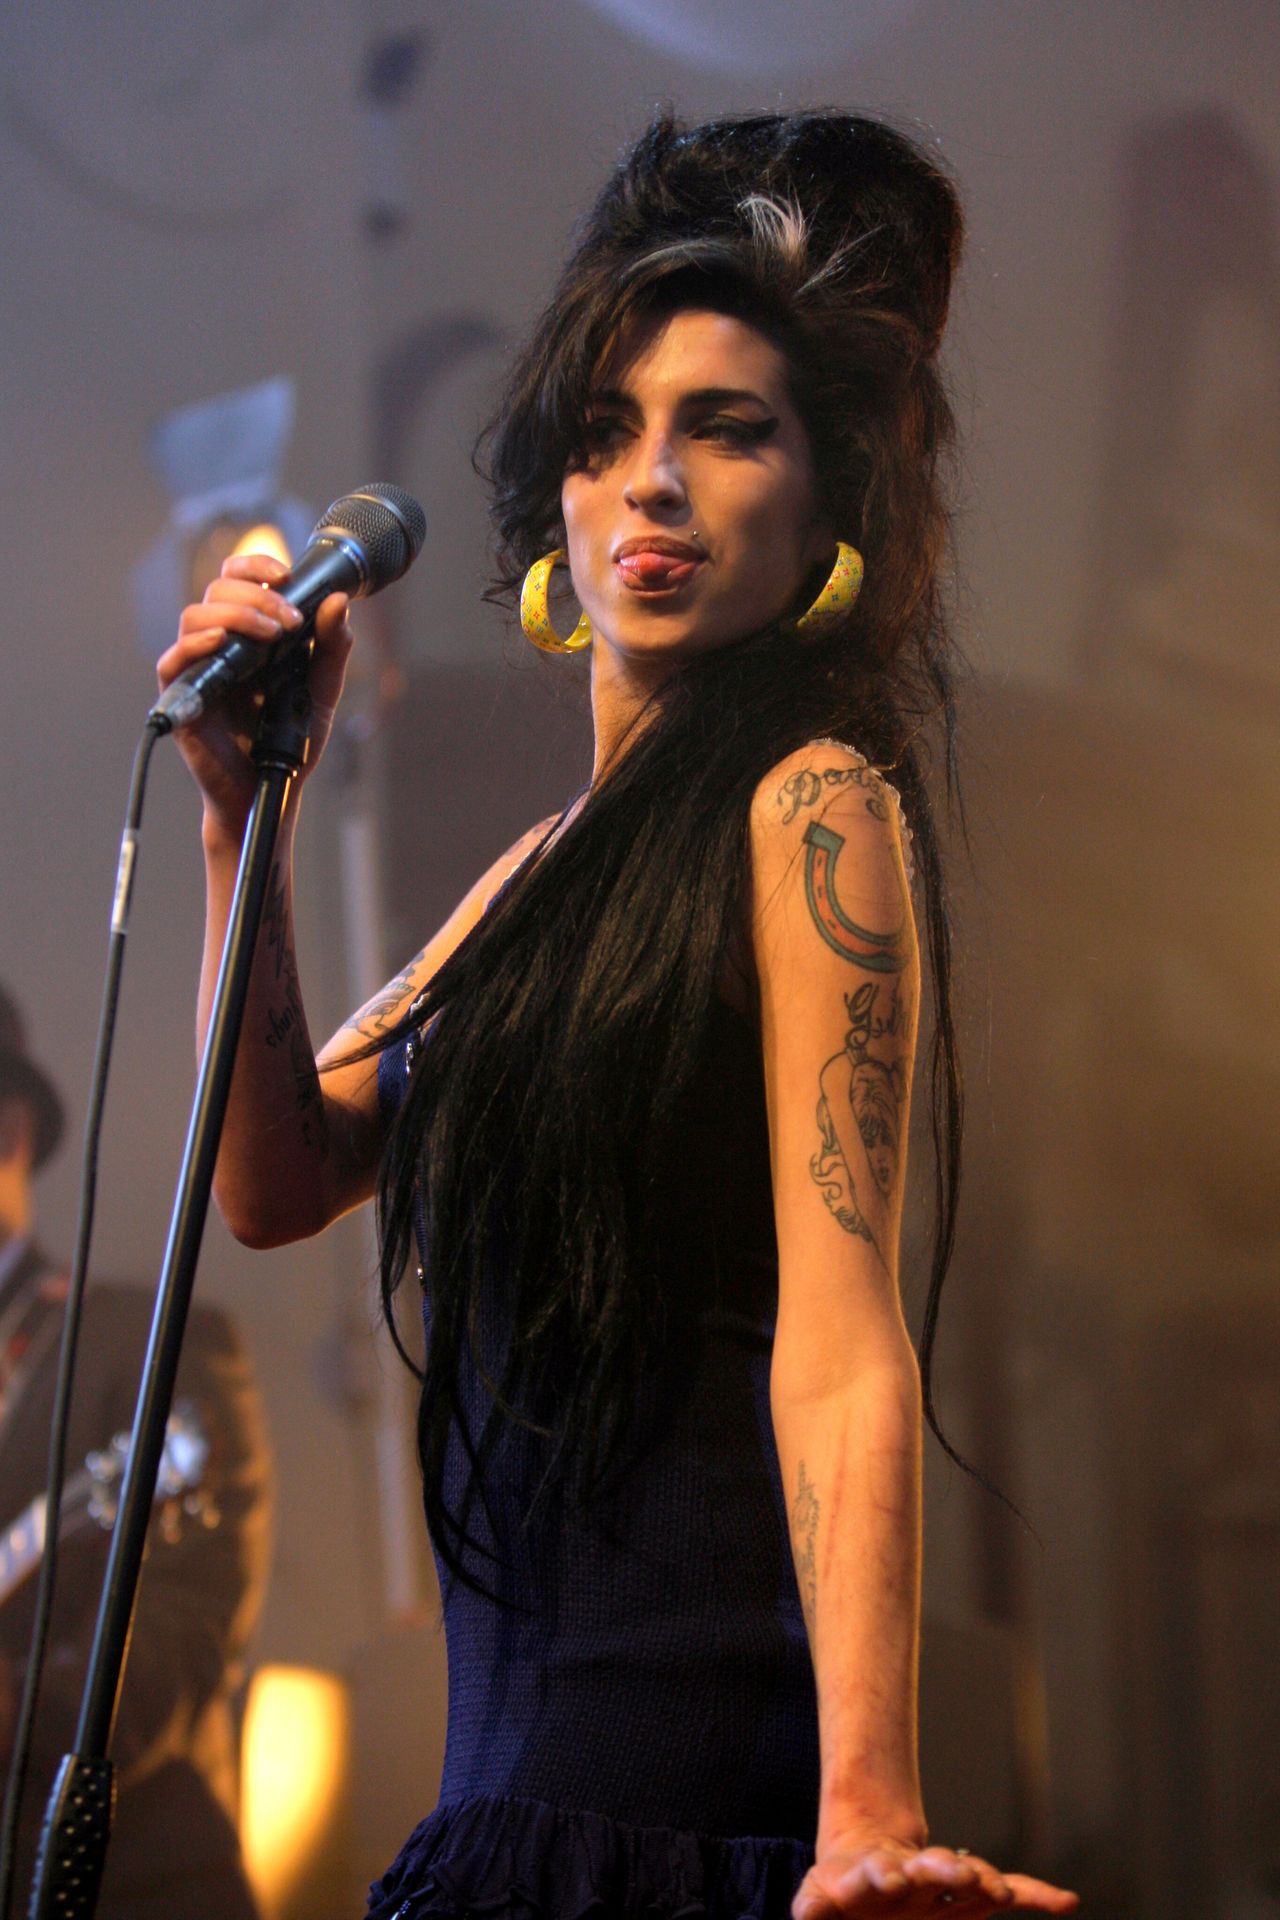 30 Stunning Amy Winehouse Photos To Remind Us What An Icon She Truly ...